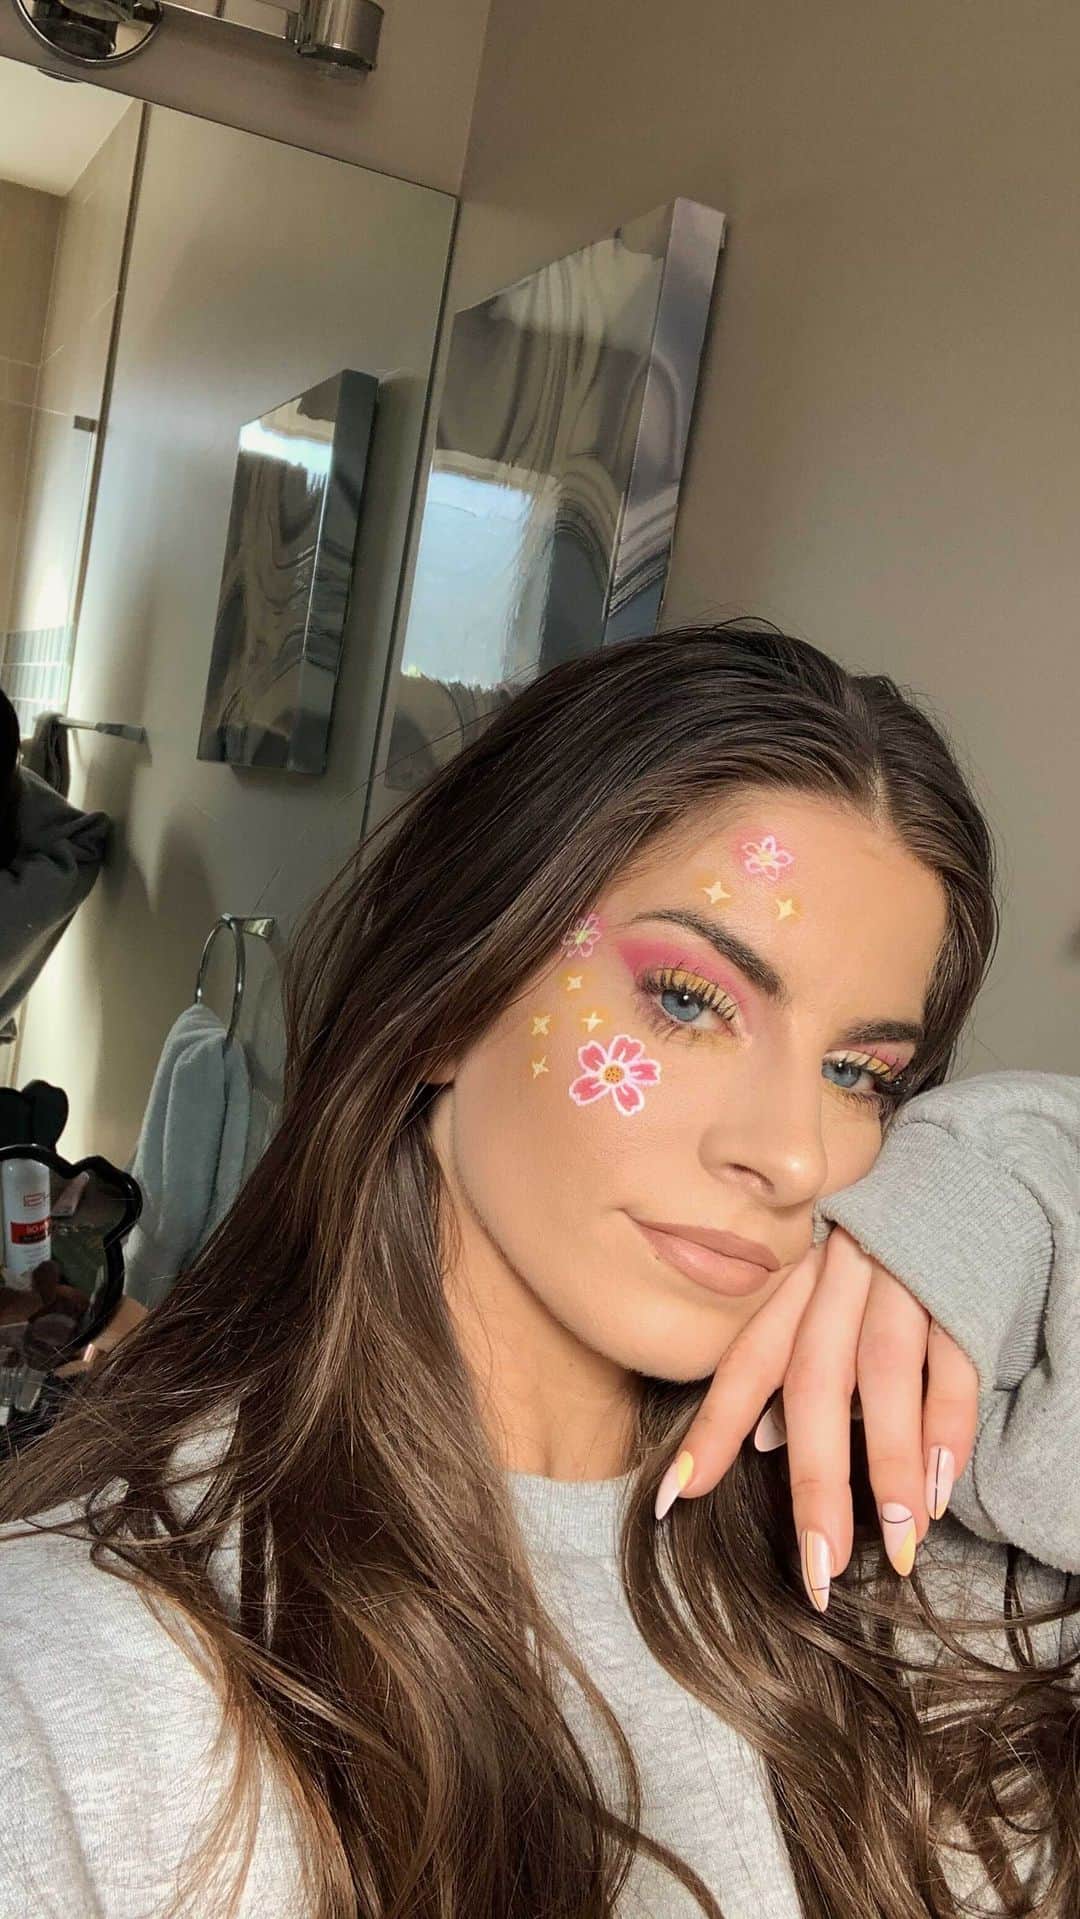 Paige Reillyのインスタグラム：「Okkkk makeup version of the emoji challenge 🌸😂 these are really pushing my creativity, so it was fun to do something different from my normal blown out wing look 😌🙌🏻⁣ ⁣ Filmed these all in one day which probably wasn’t my smartest decision since I kinda got a little lazy lol BUT hope you guys enjoyed it, thinking about doing more but it’s definitelyyy more time consuming than the outfit one 😂❤️」